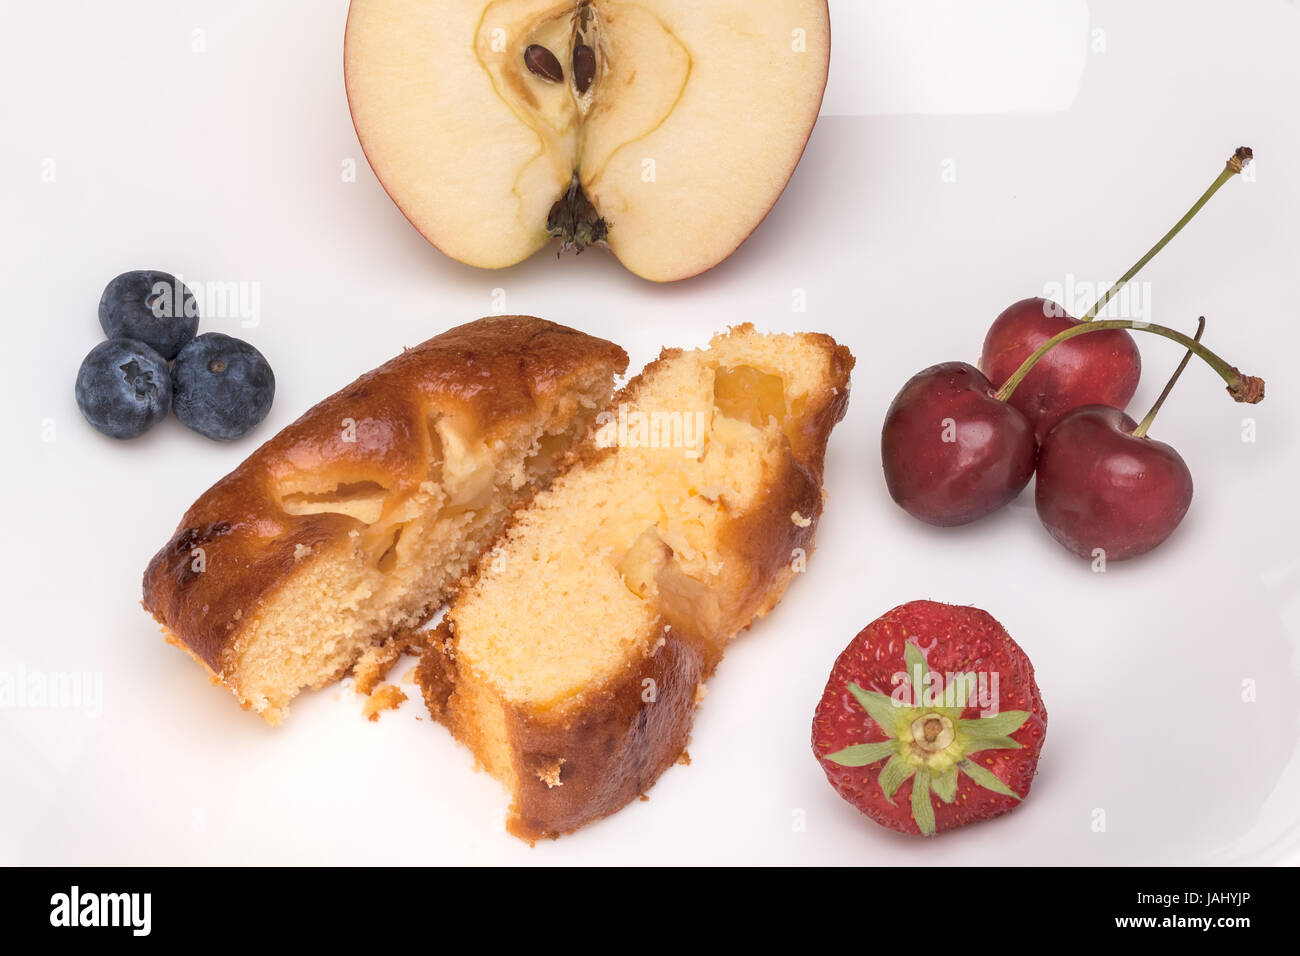 An elongated apple cake with coffee and fruit Stock Photo